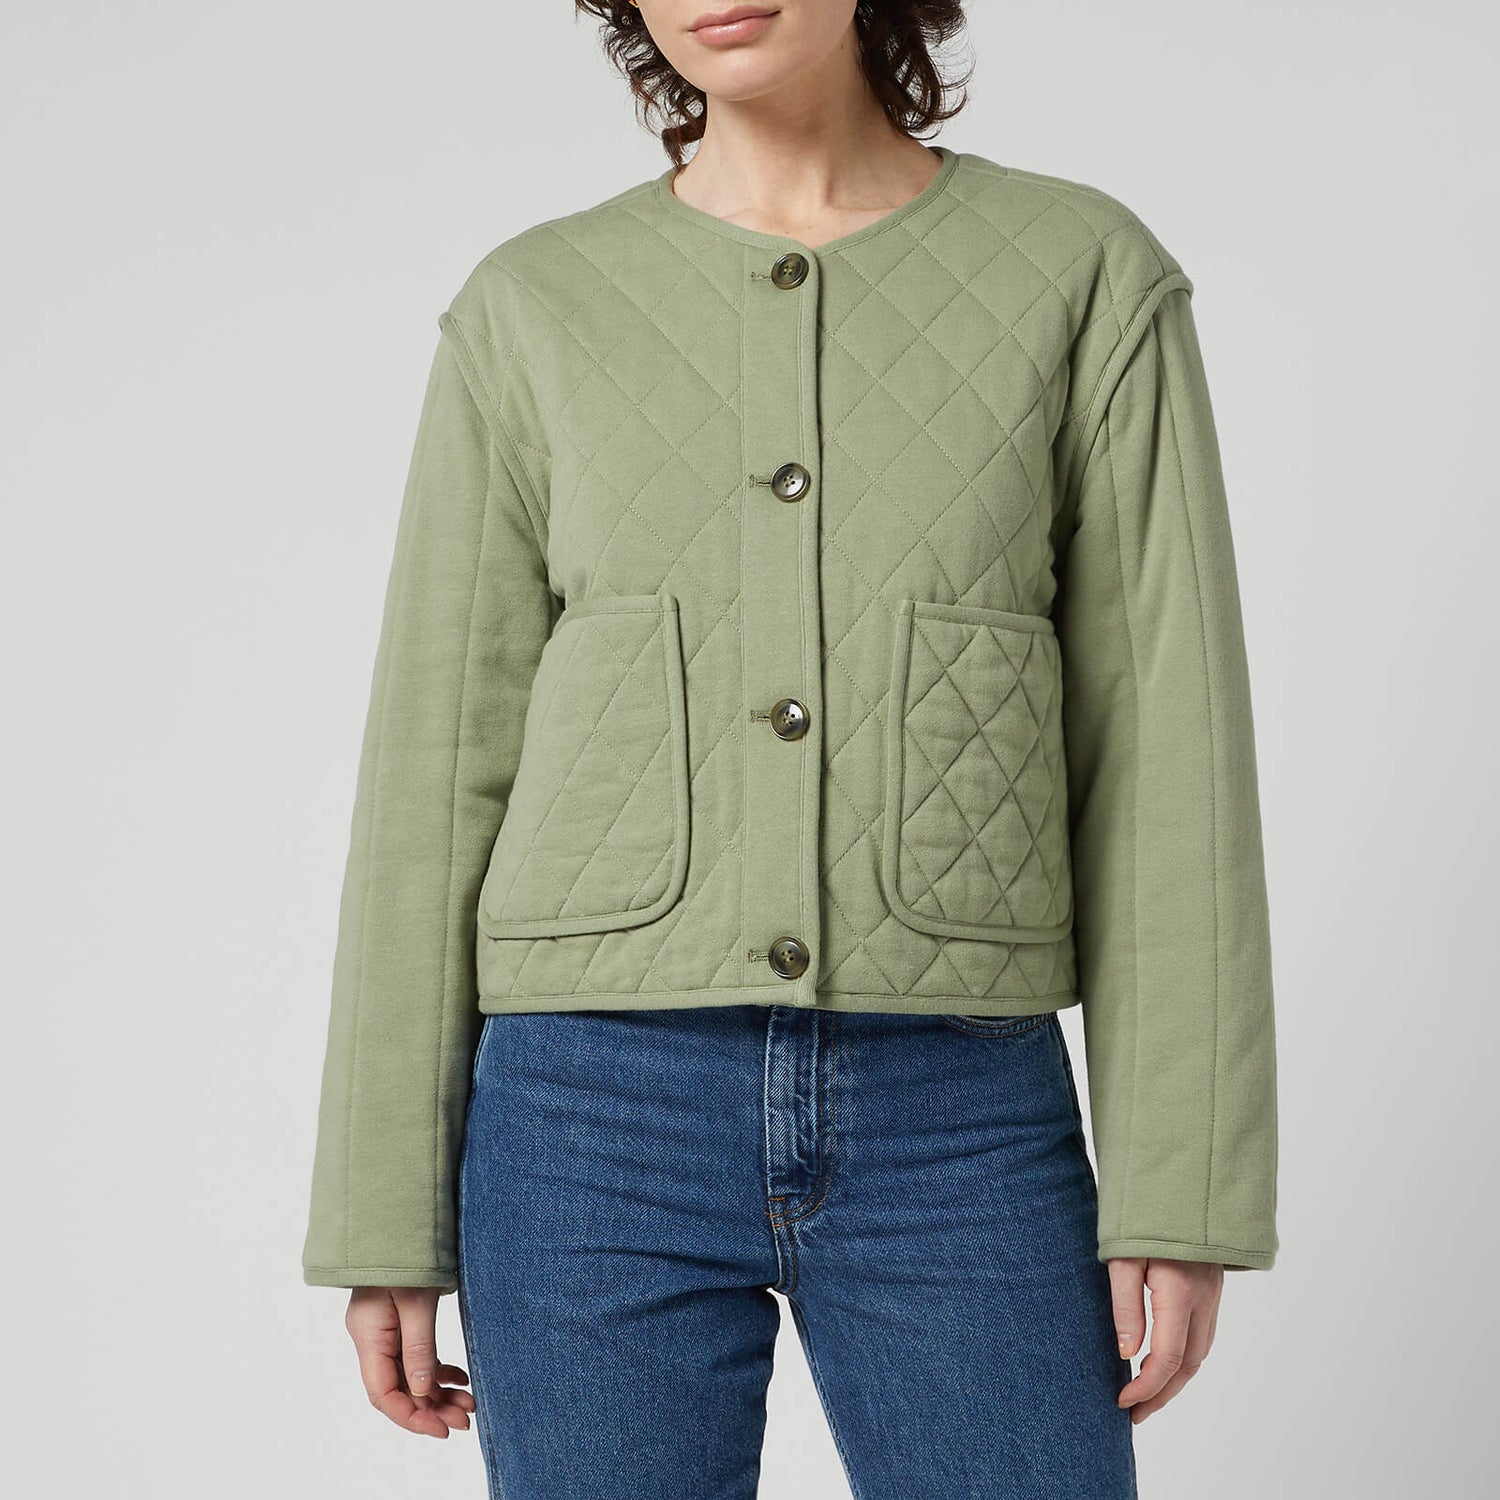 Whistles Women's Cynthia Quilted Jacket - Sage